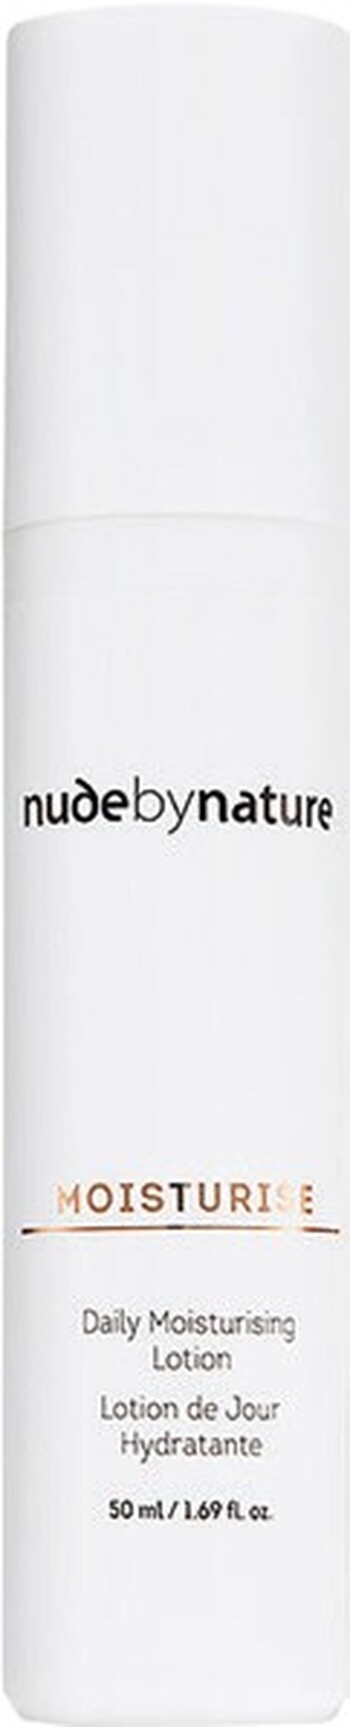 Nude by Nature Daily Moisturising Lotion 50mL